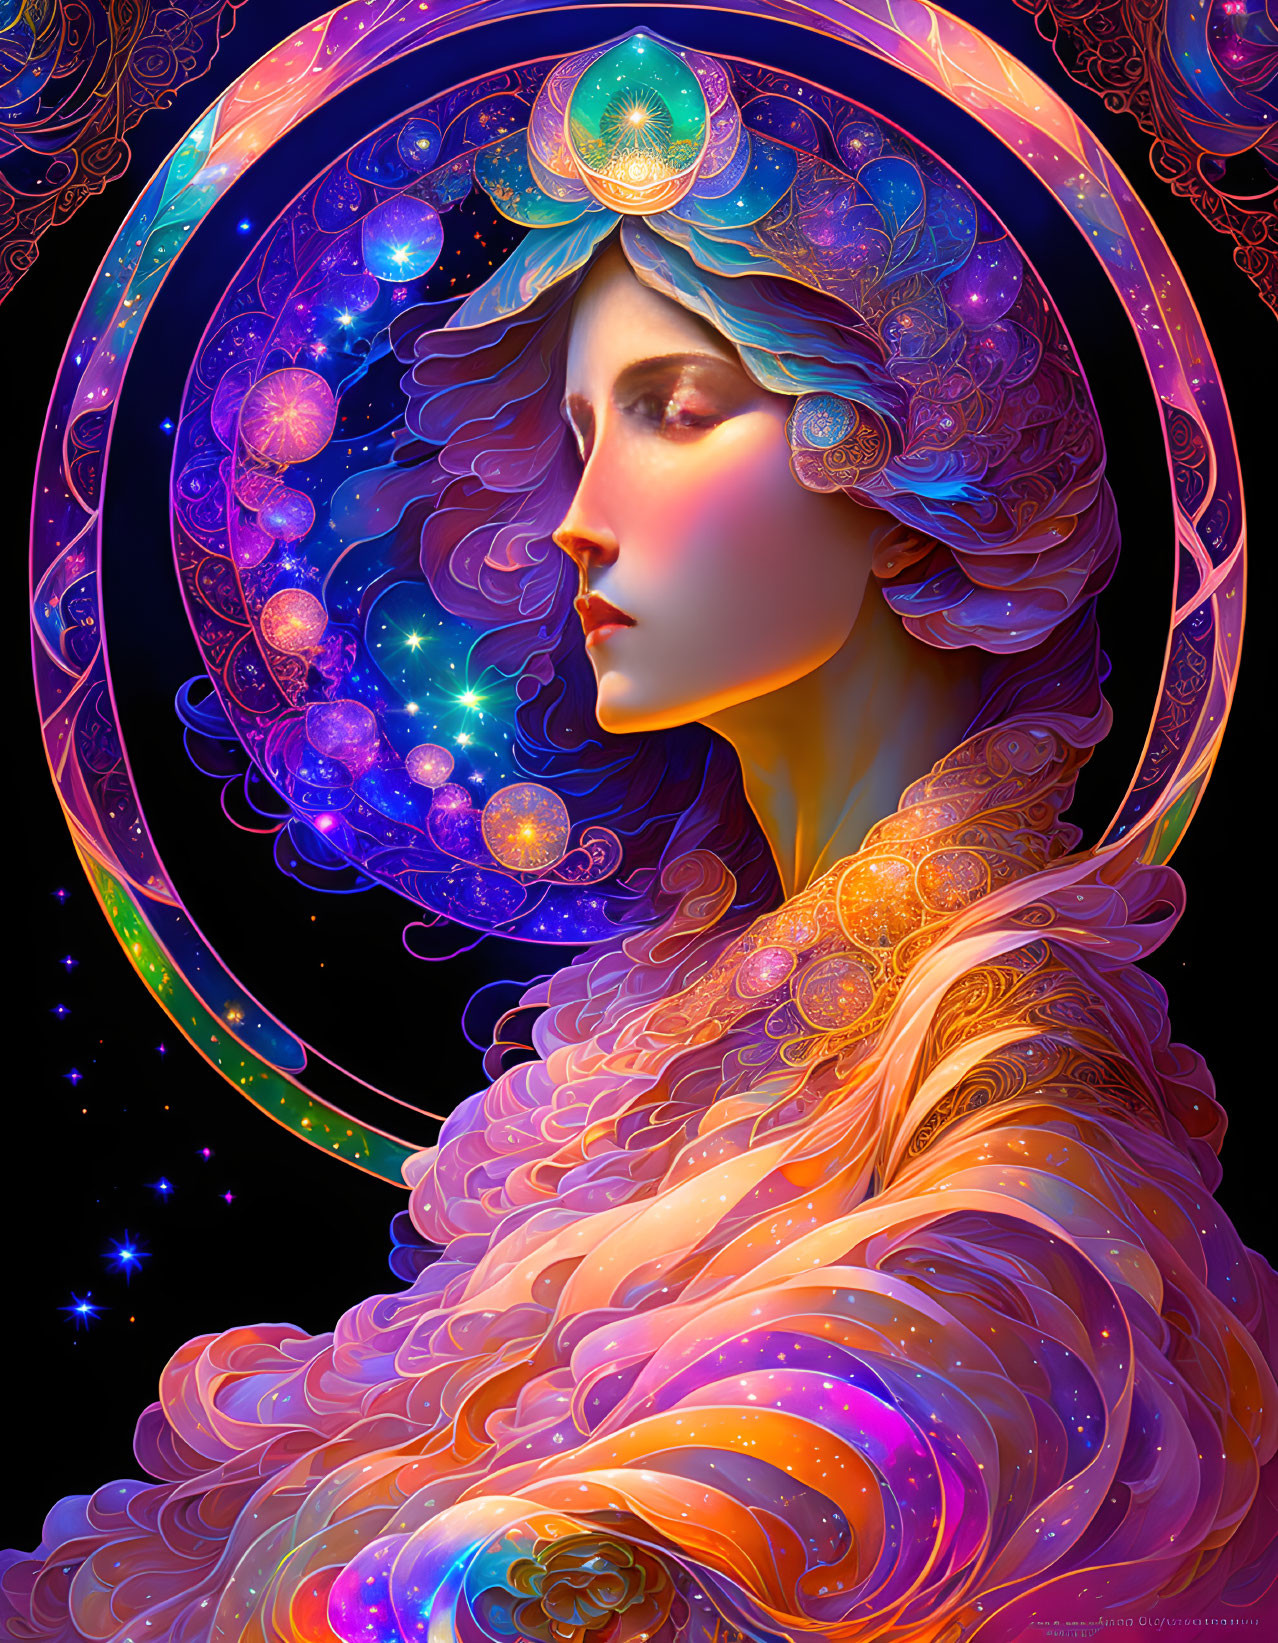 Ethereal woman with cosmic backdrop and celestial design.